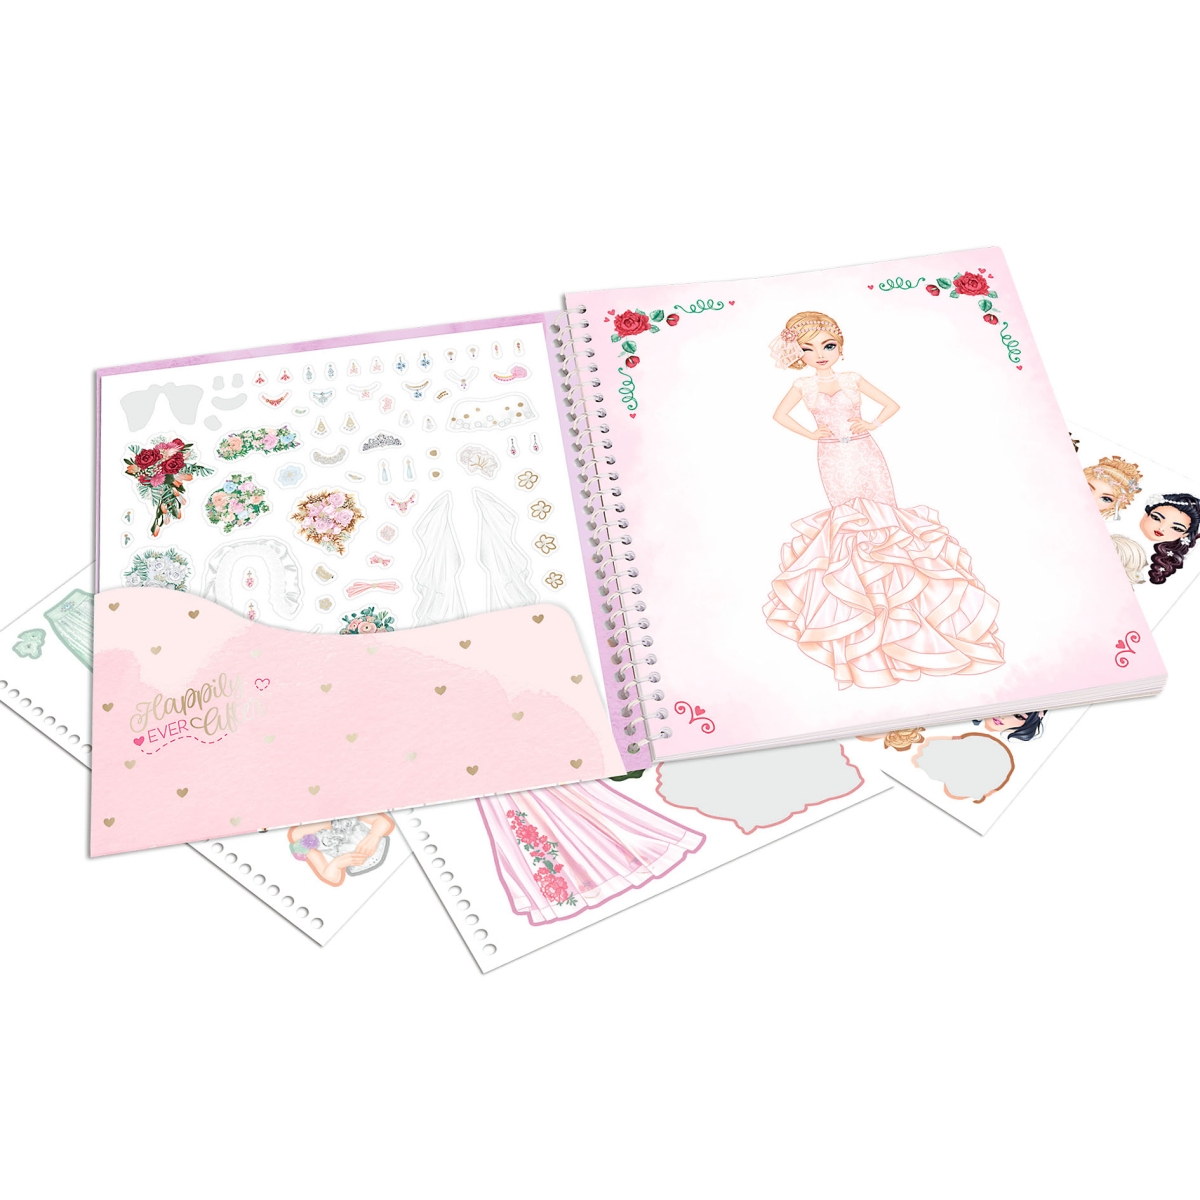 Top Model - Dress Me Up Sticker Book 410452 US India